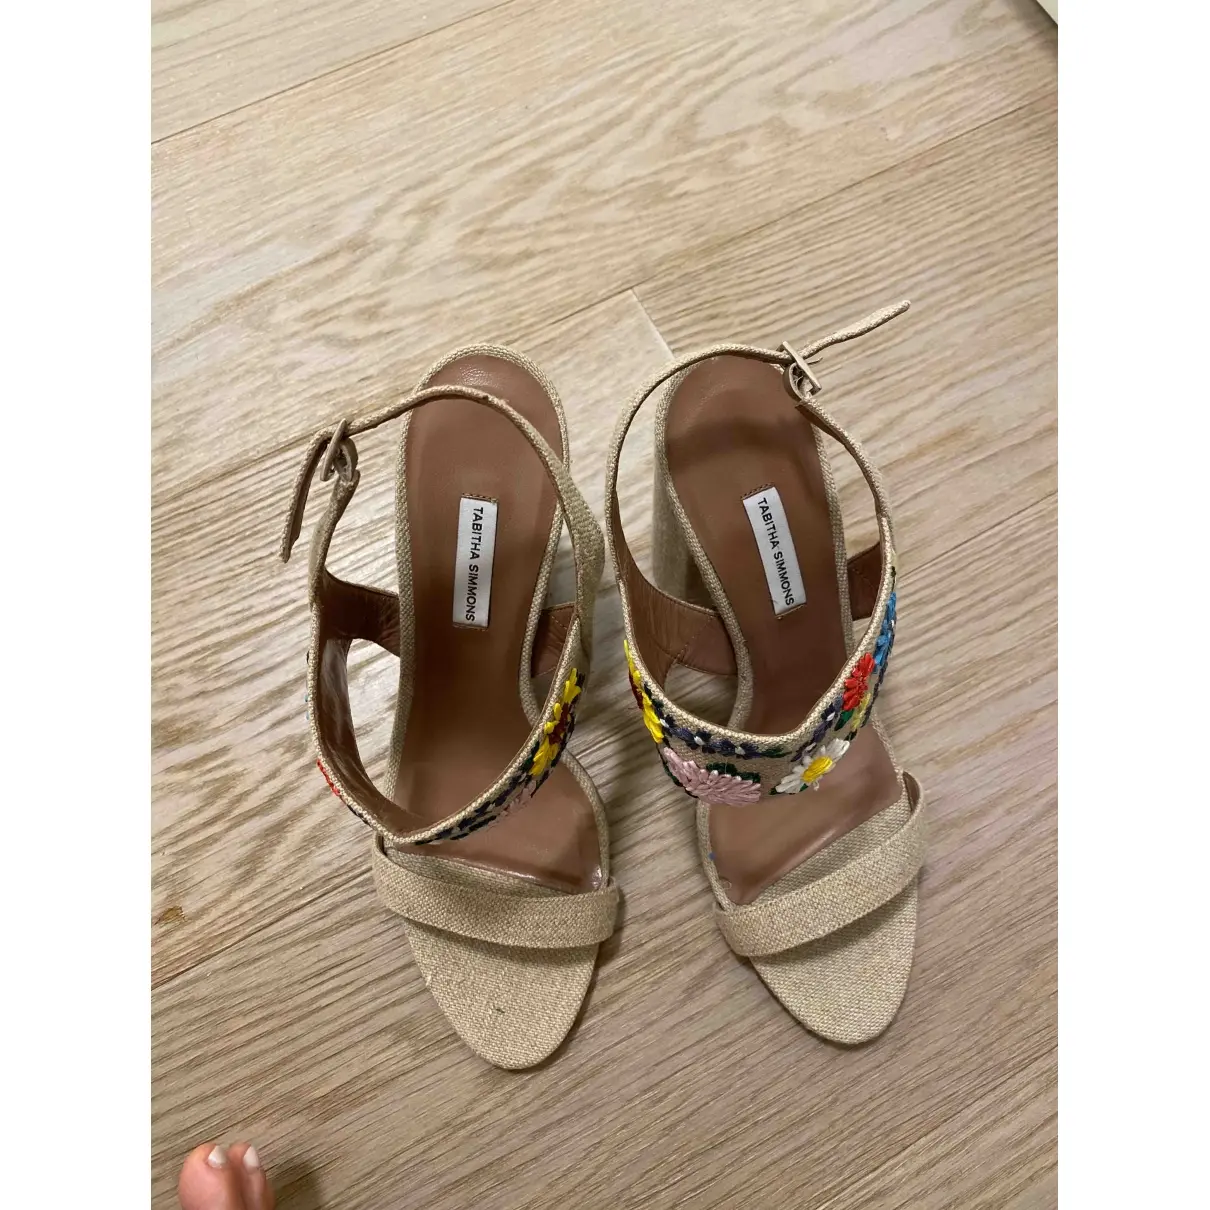 Tabitha Simmons Cloth sandals for sale